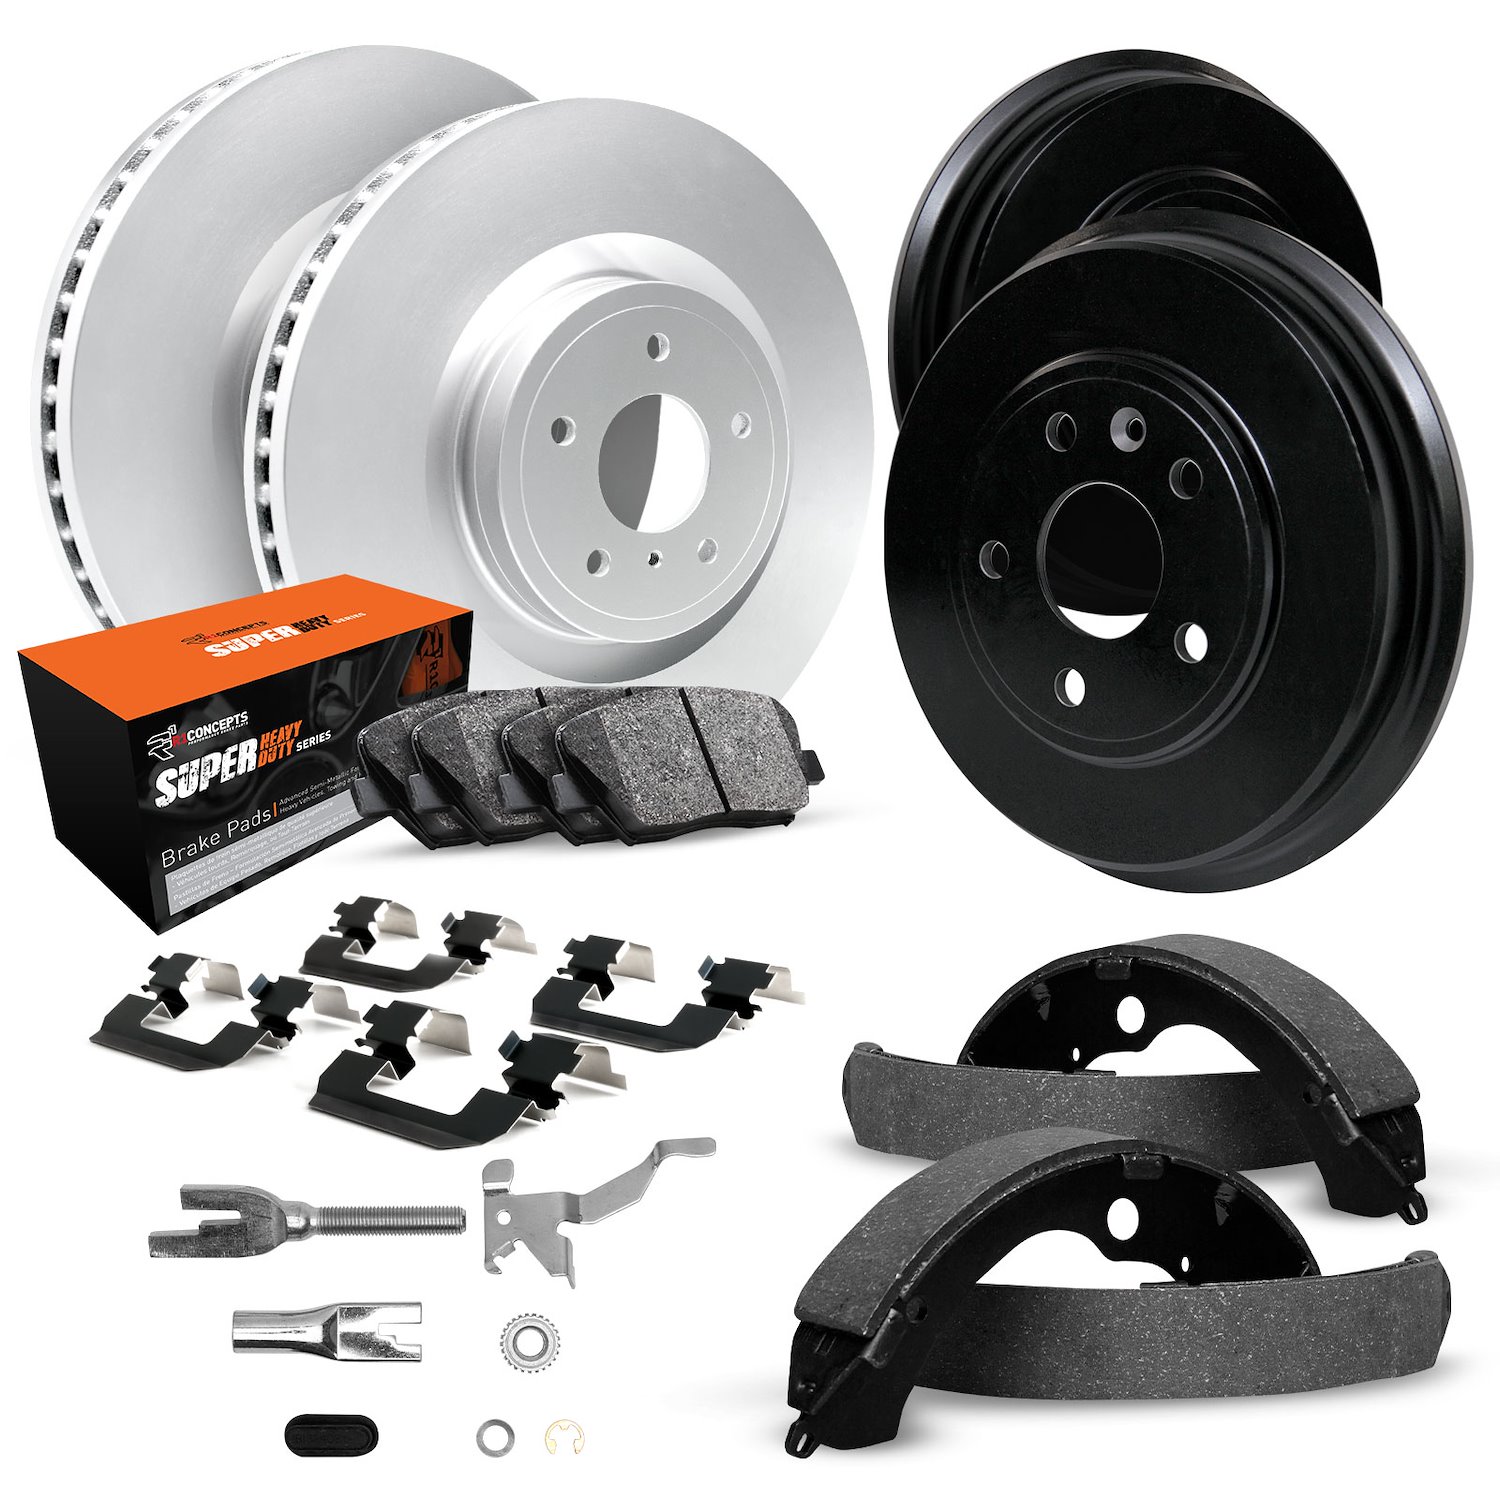 GEO-Carbon Brake Rotor & Drum Set w/Super-Duty Pads, Shoes, Hardware/Adjusters, 2002-2007 GM, Position: Front & Rear